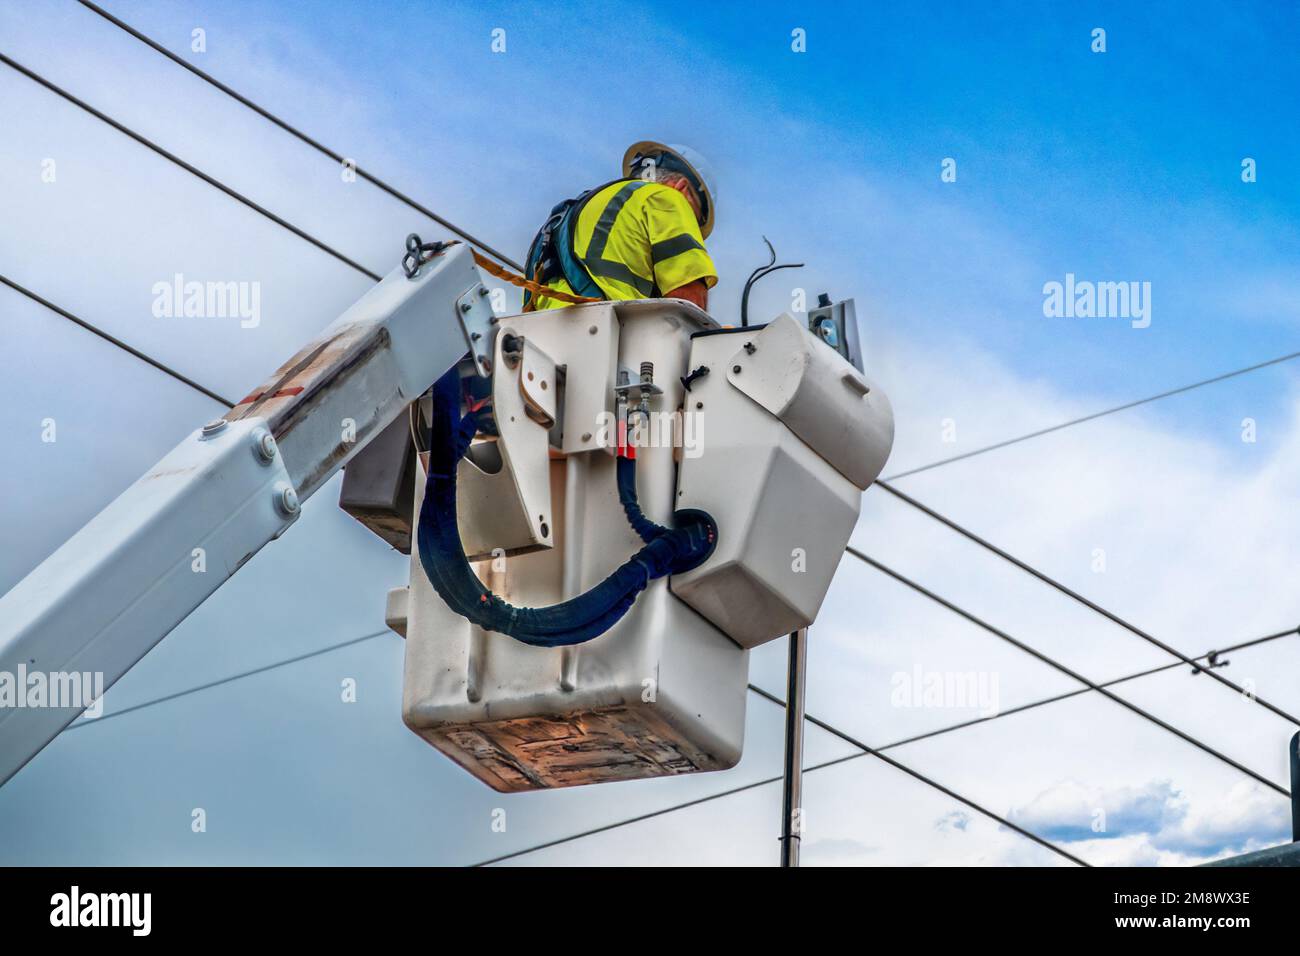 Electrician workman in green safety vest and helmet in crane lift working on highlines or traffic lights high in the air with sky background Stock Photo